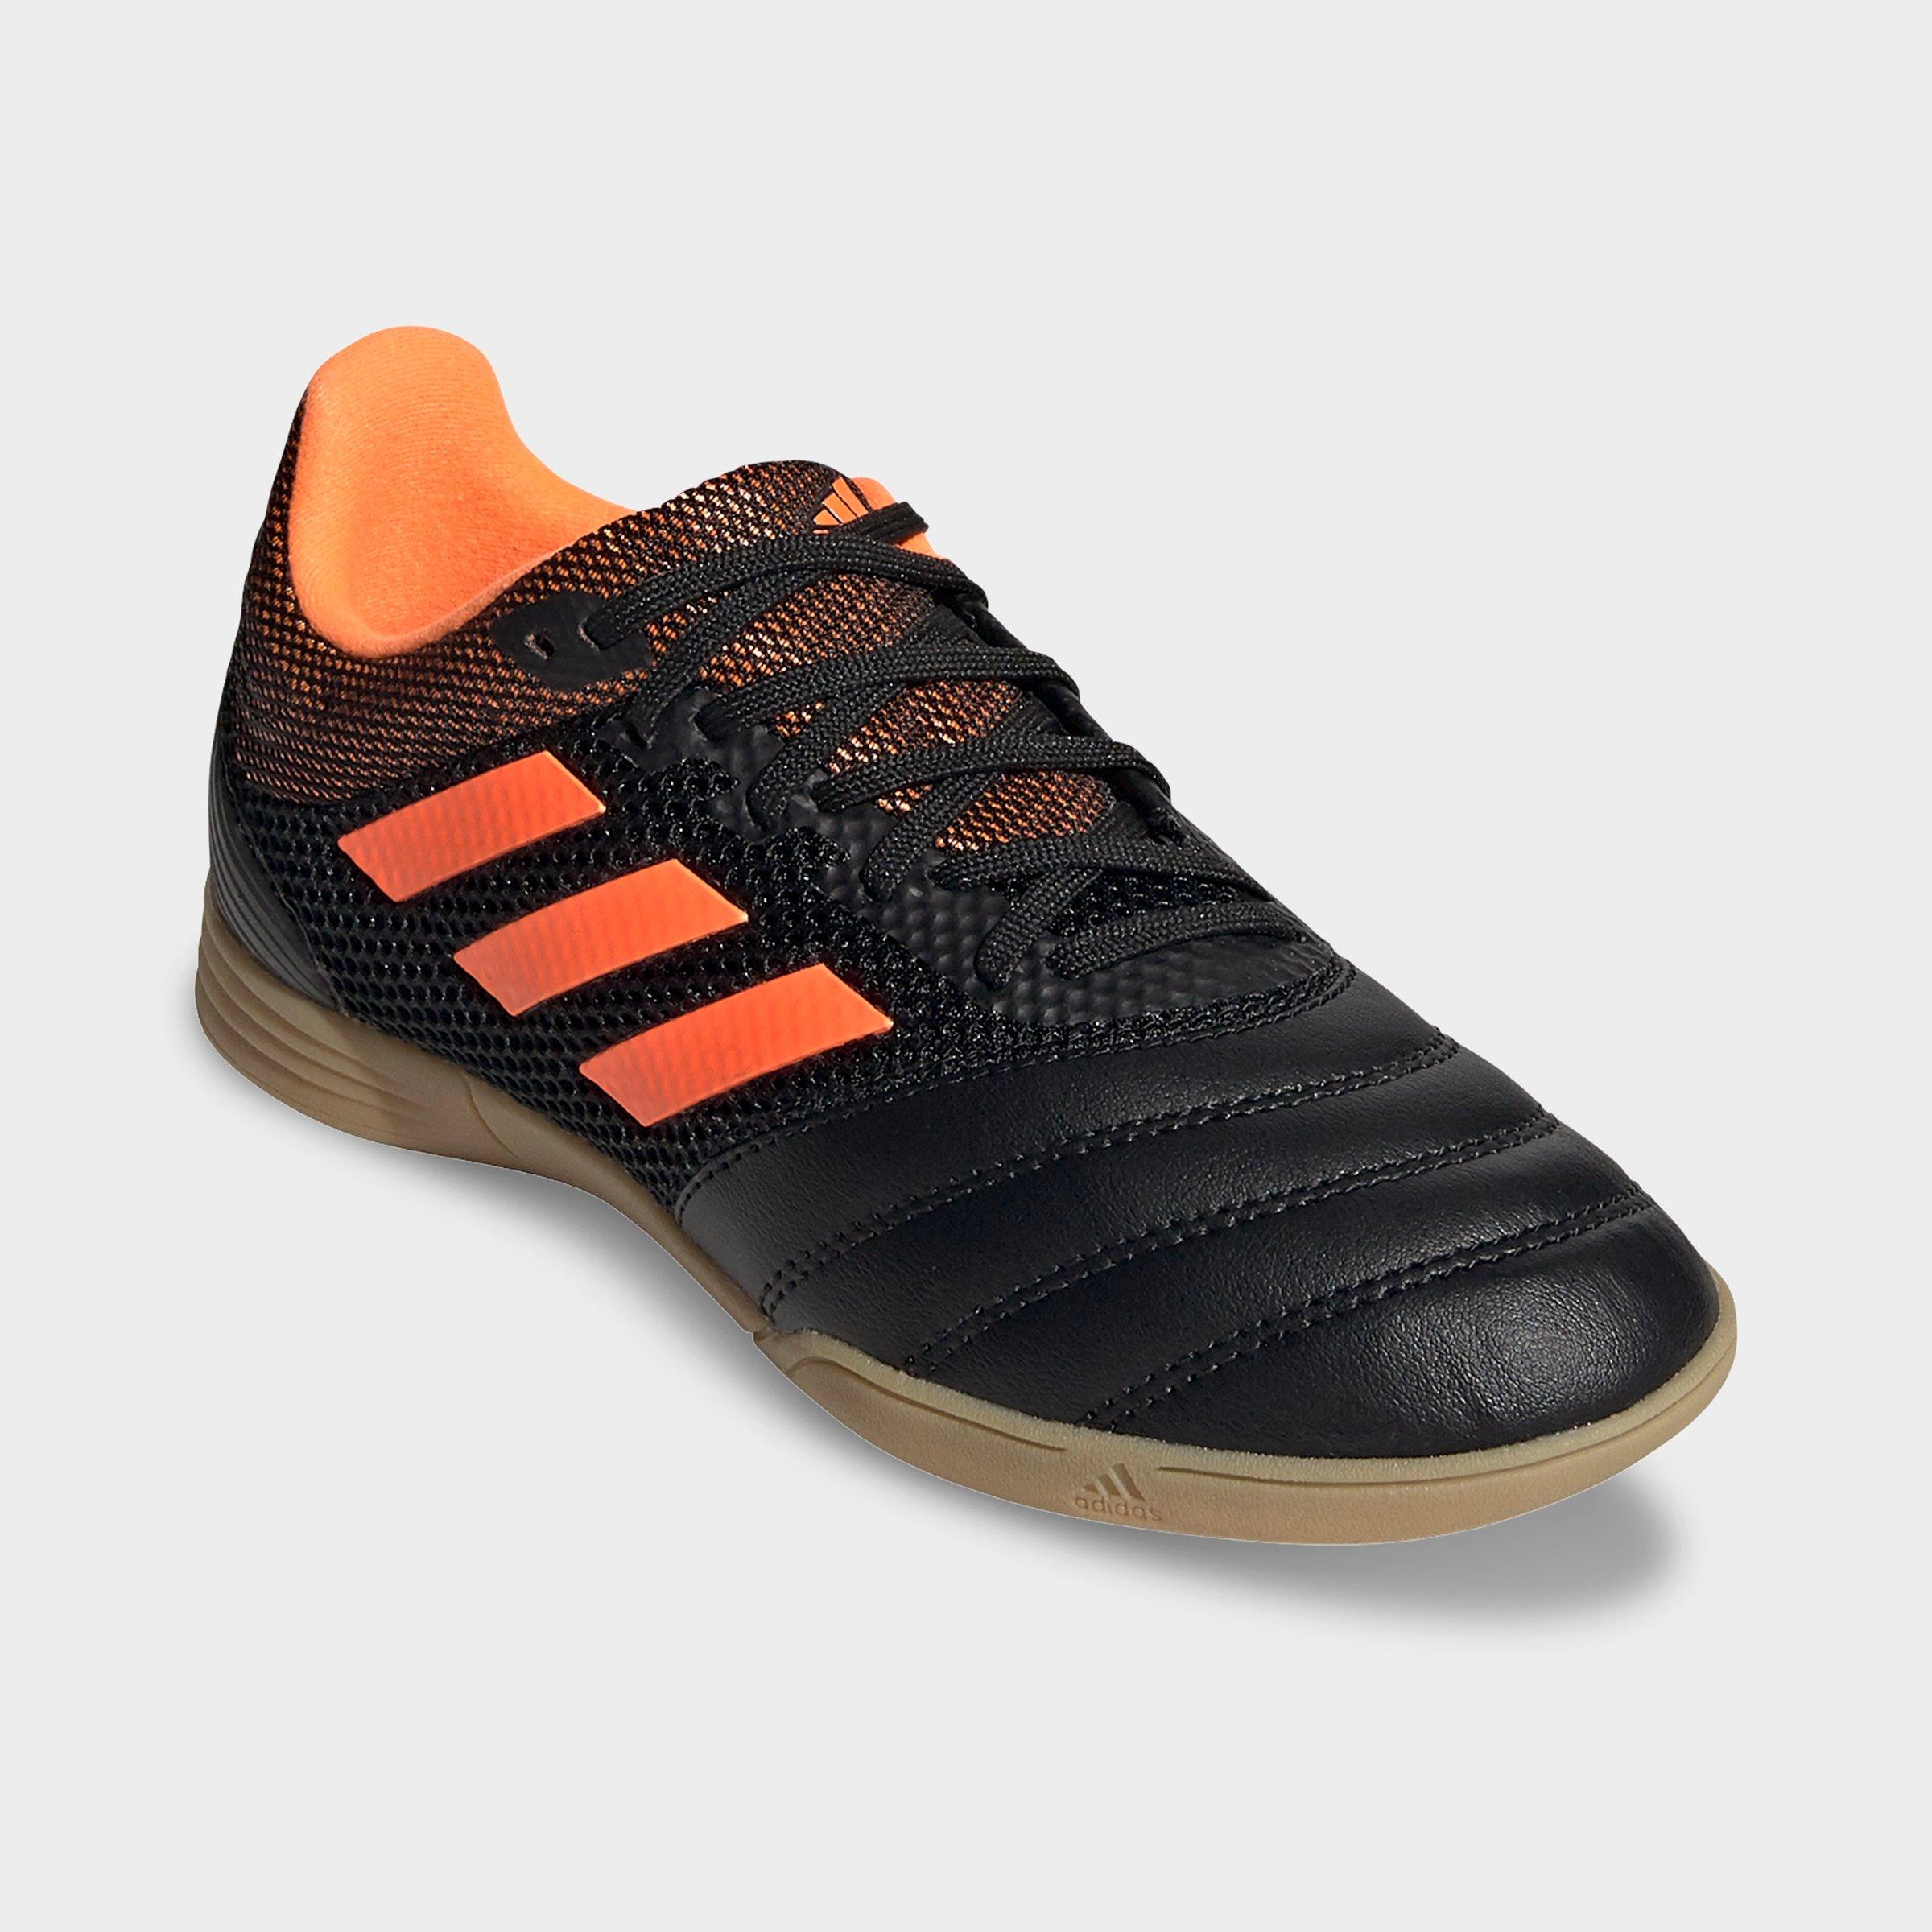 jd sports indoor soccer shoes